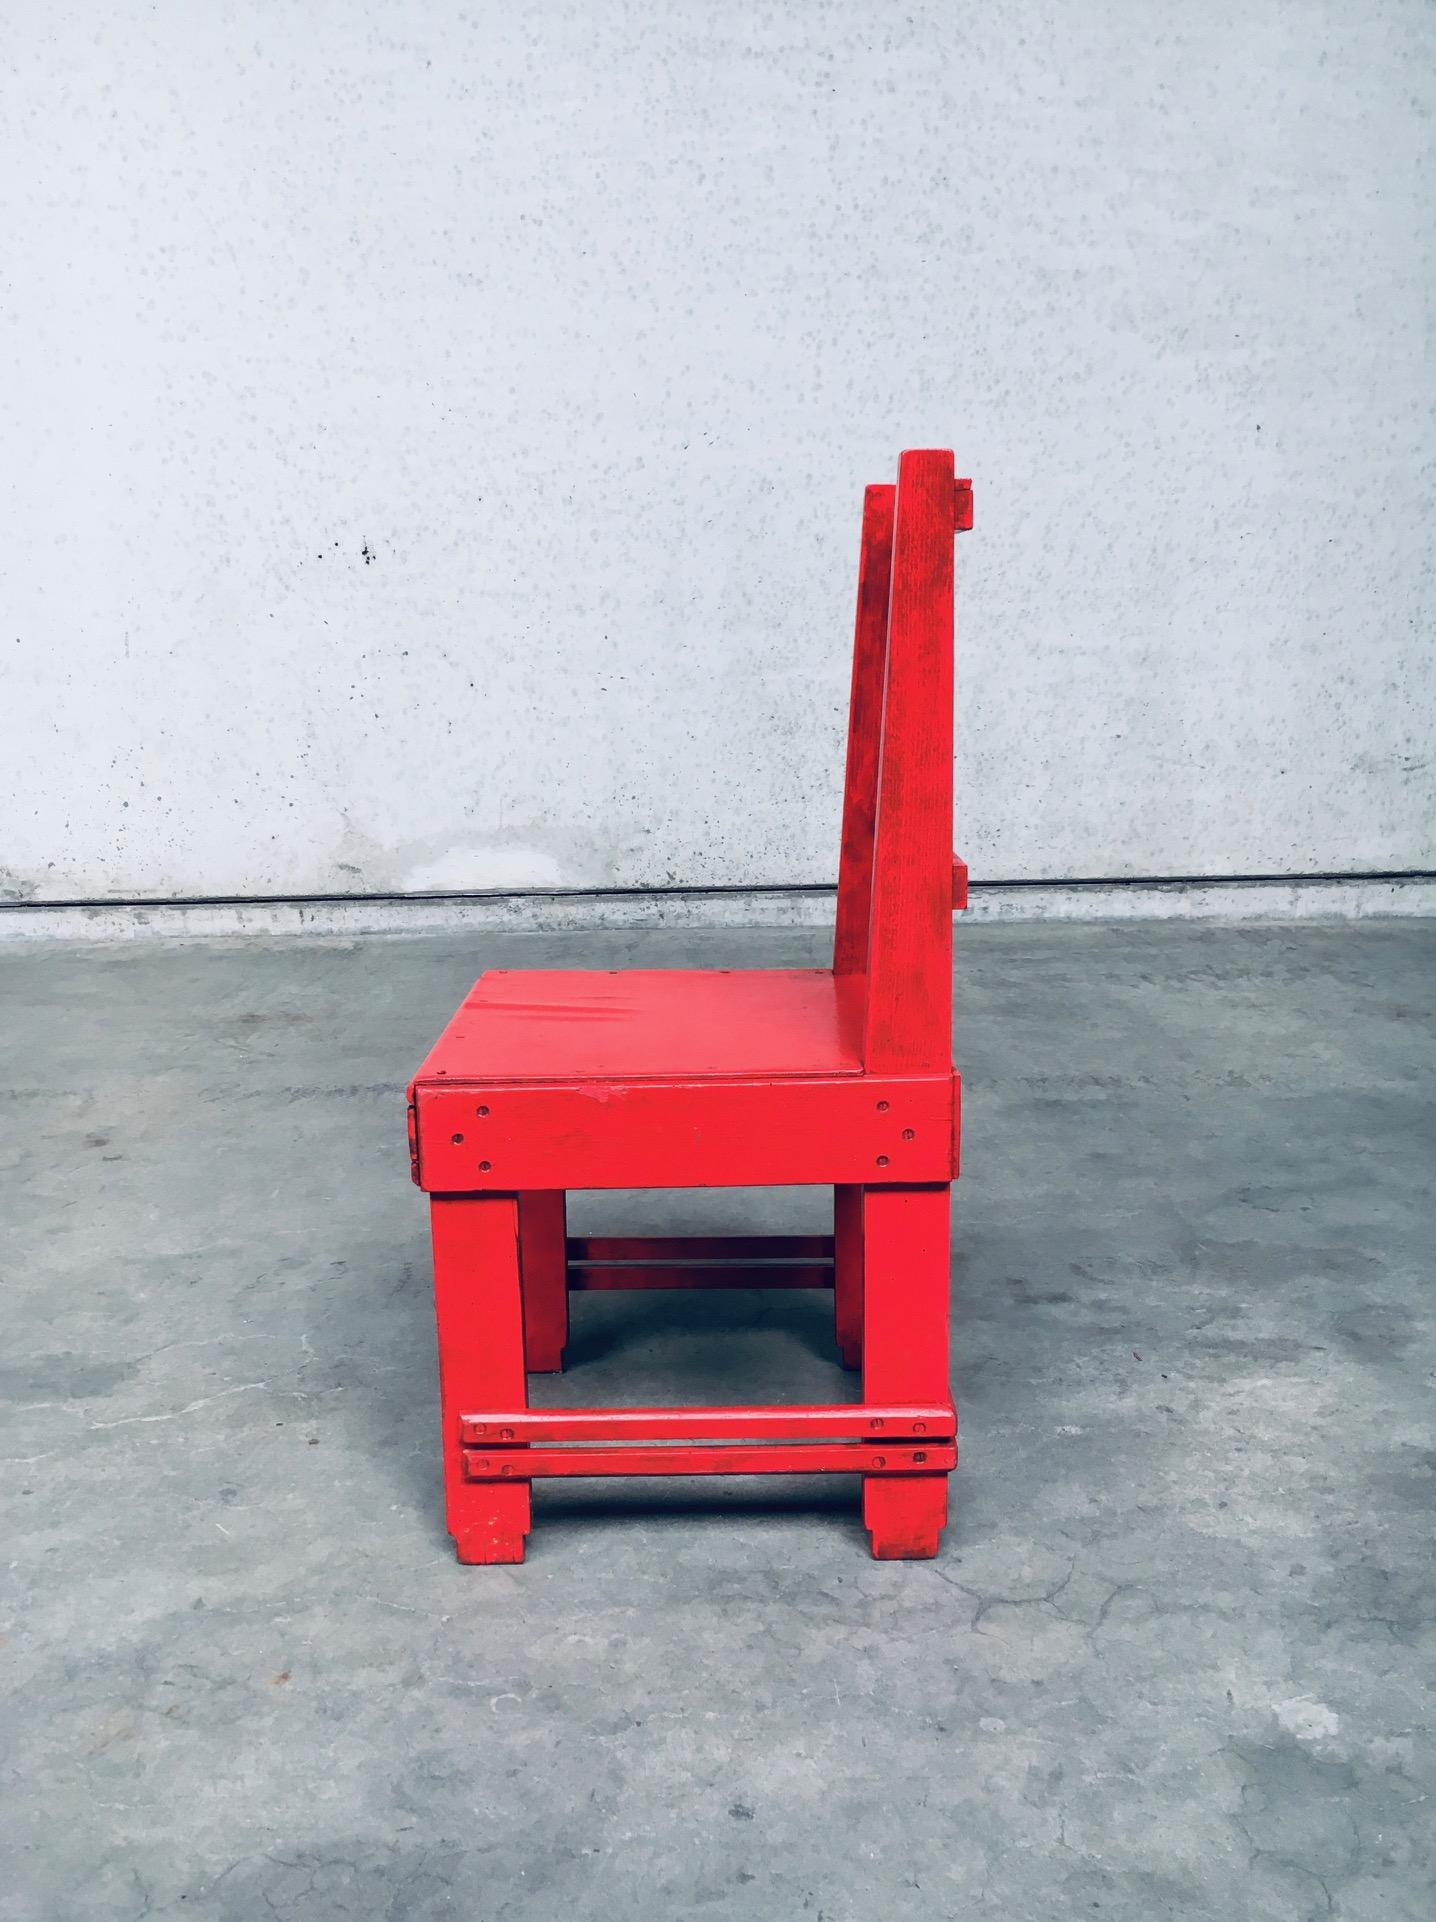 Early 20th Century De Stijl Movement Design Red Chair Attributed to Jan Wils, 1920's Netherlands For Sale